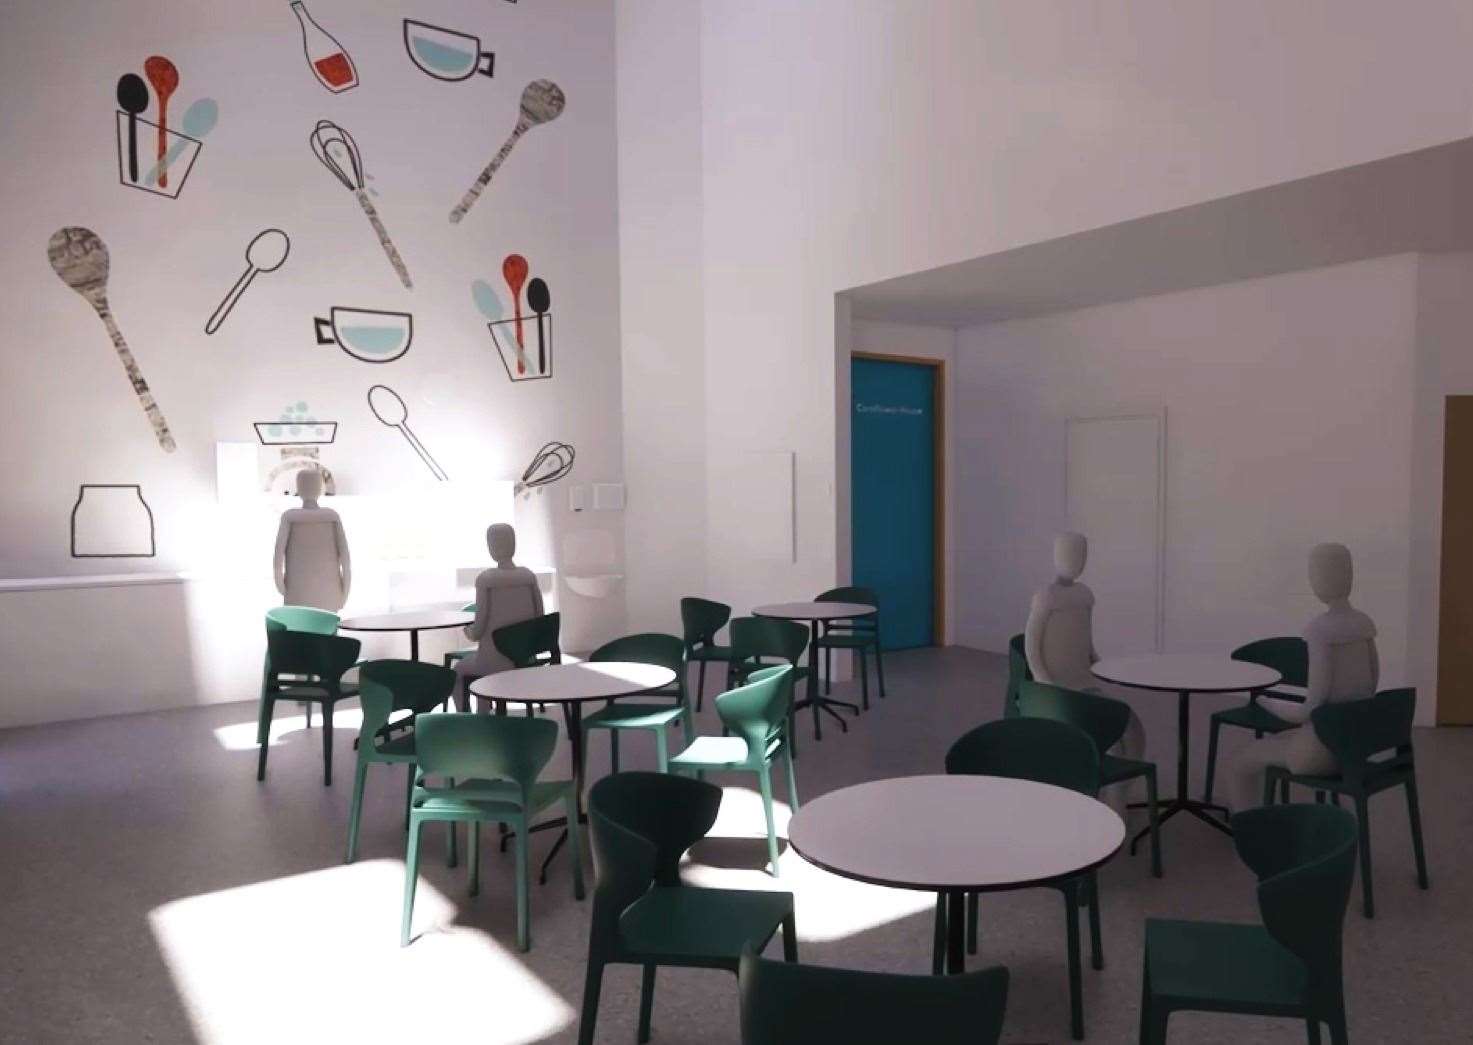 The dining room as part of the new Ruby Ward proposals at the KMPT site in Hermitage Lane, Maidstone have been released which will see the ward currently located at Medway Maritime Hospital closed. Picture: KMPT